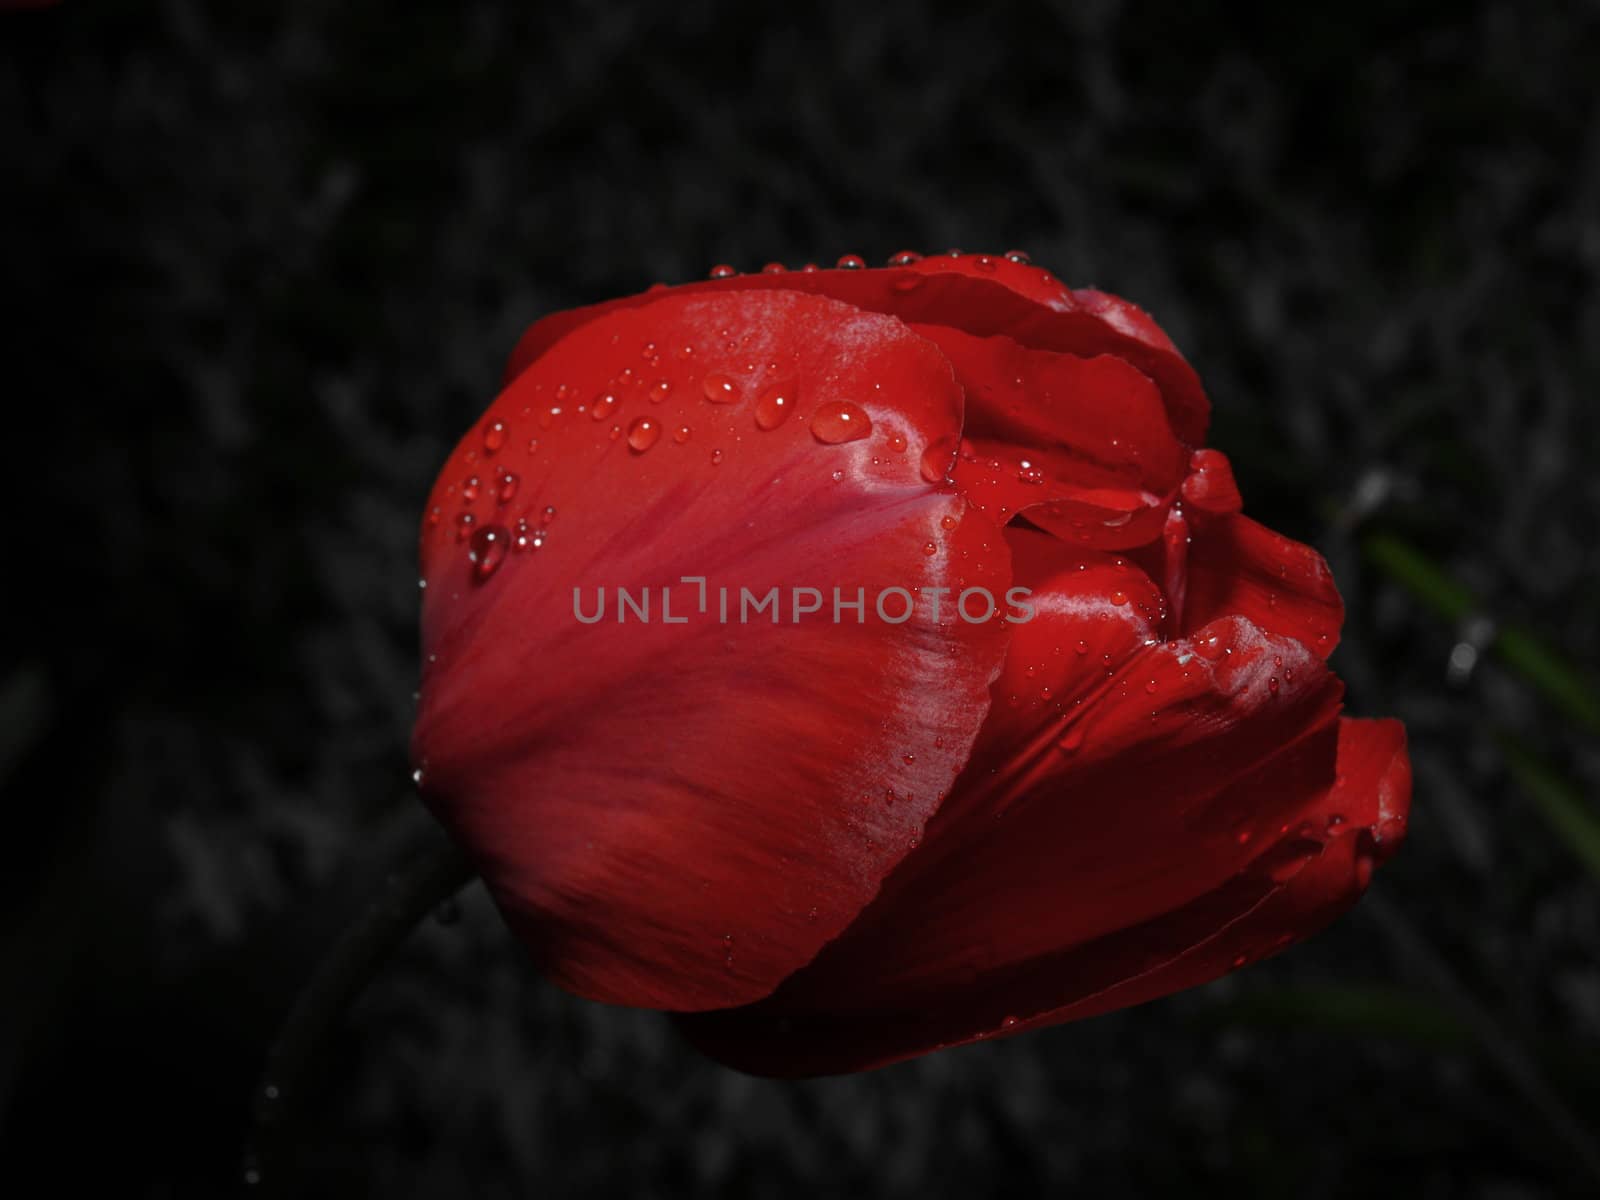 Raindrops on a tulip bulb by anderm